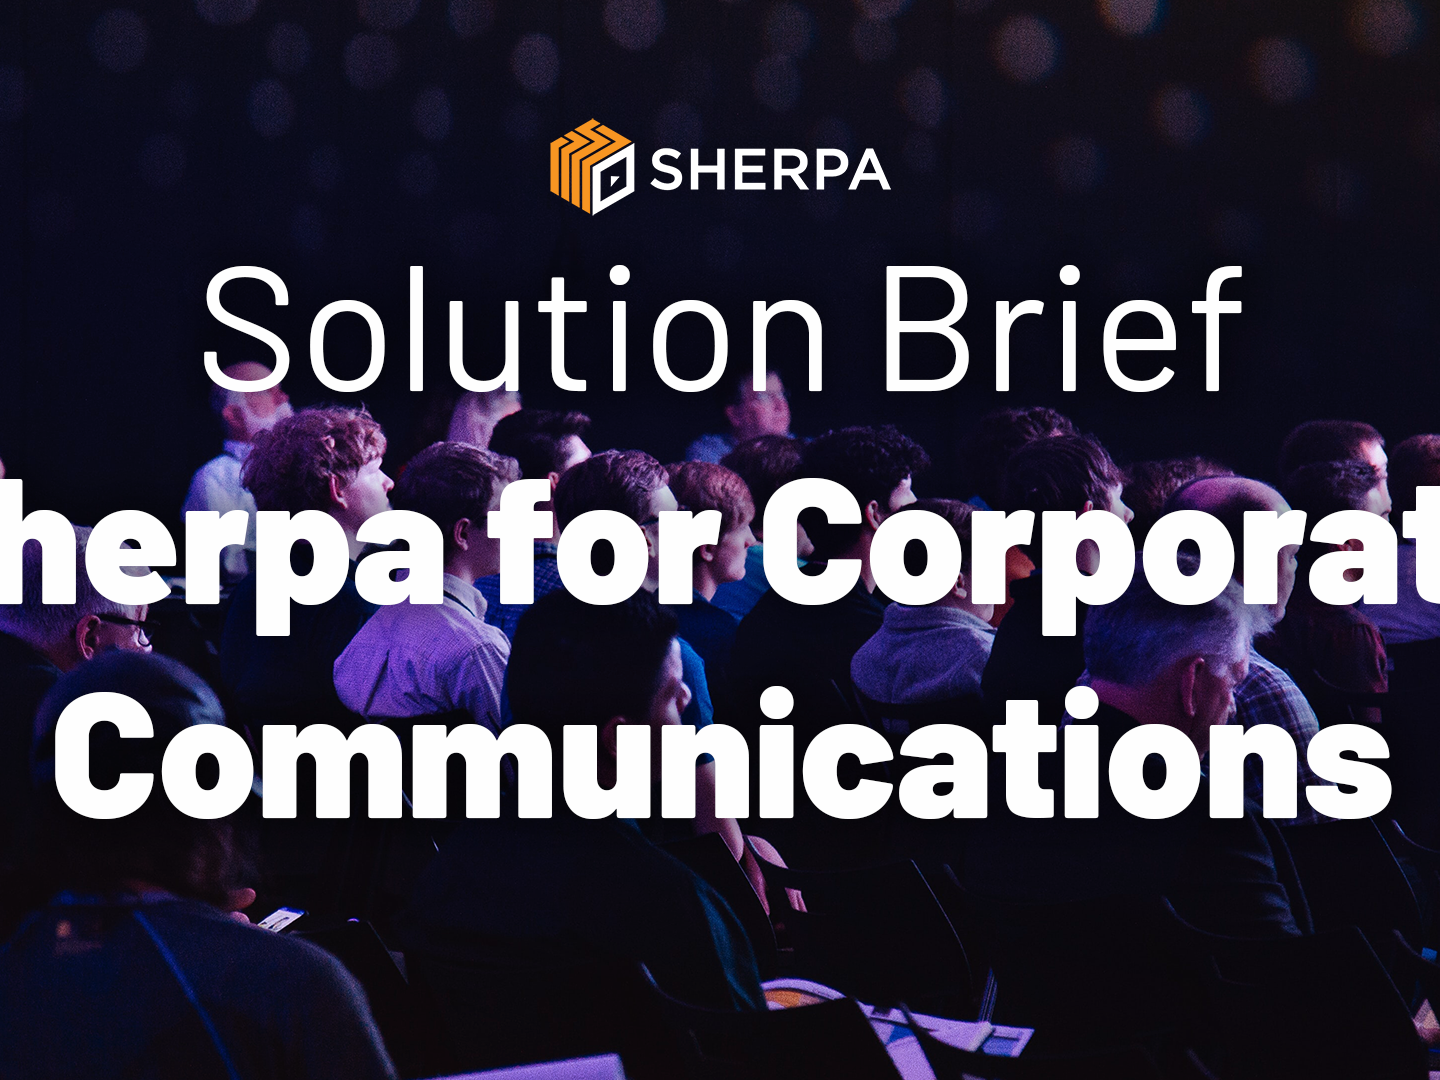 Sherpa for Corporate Communications